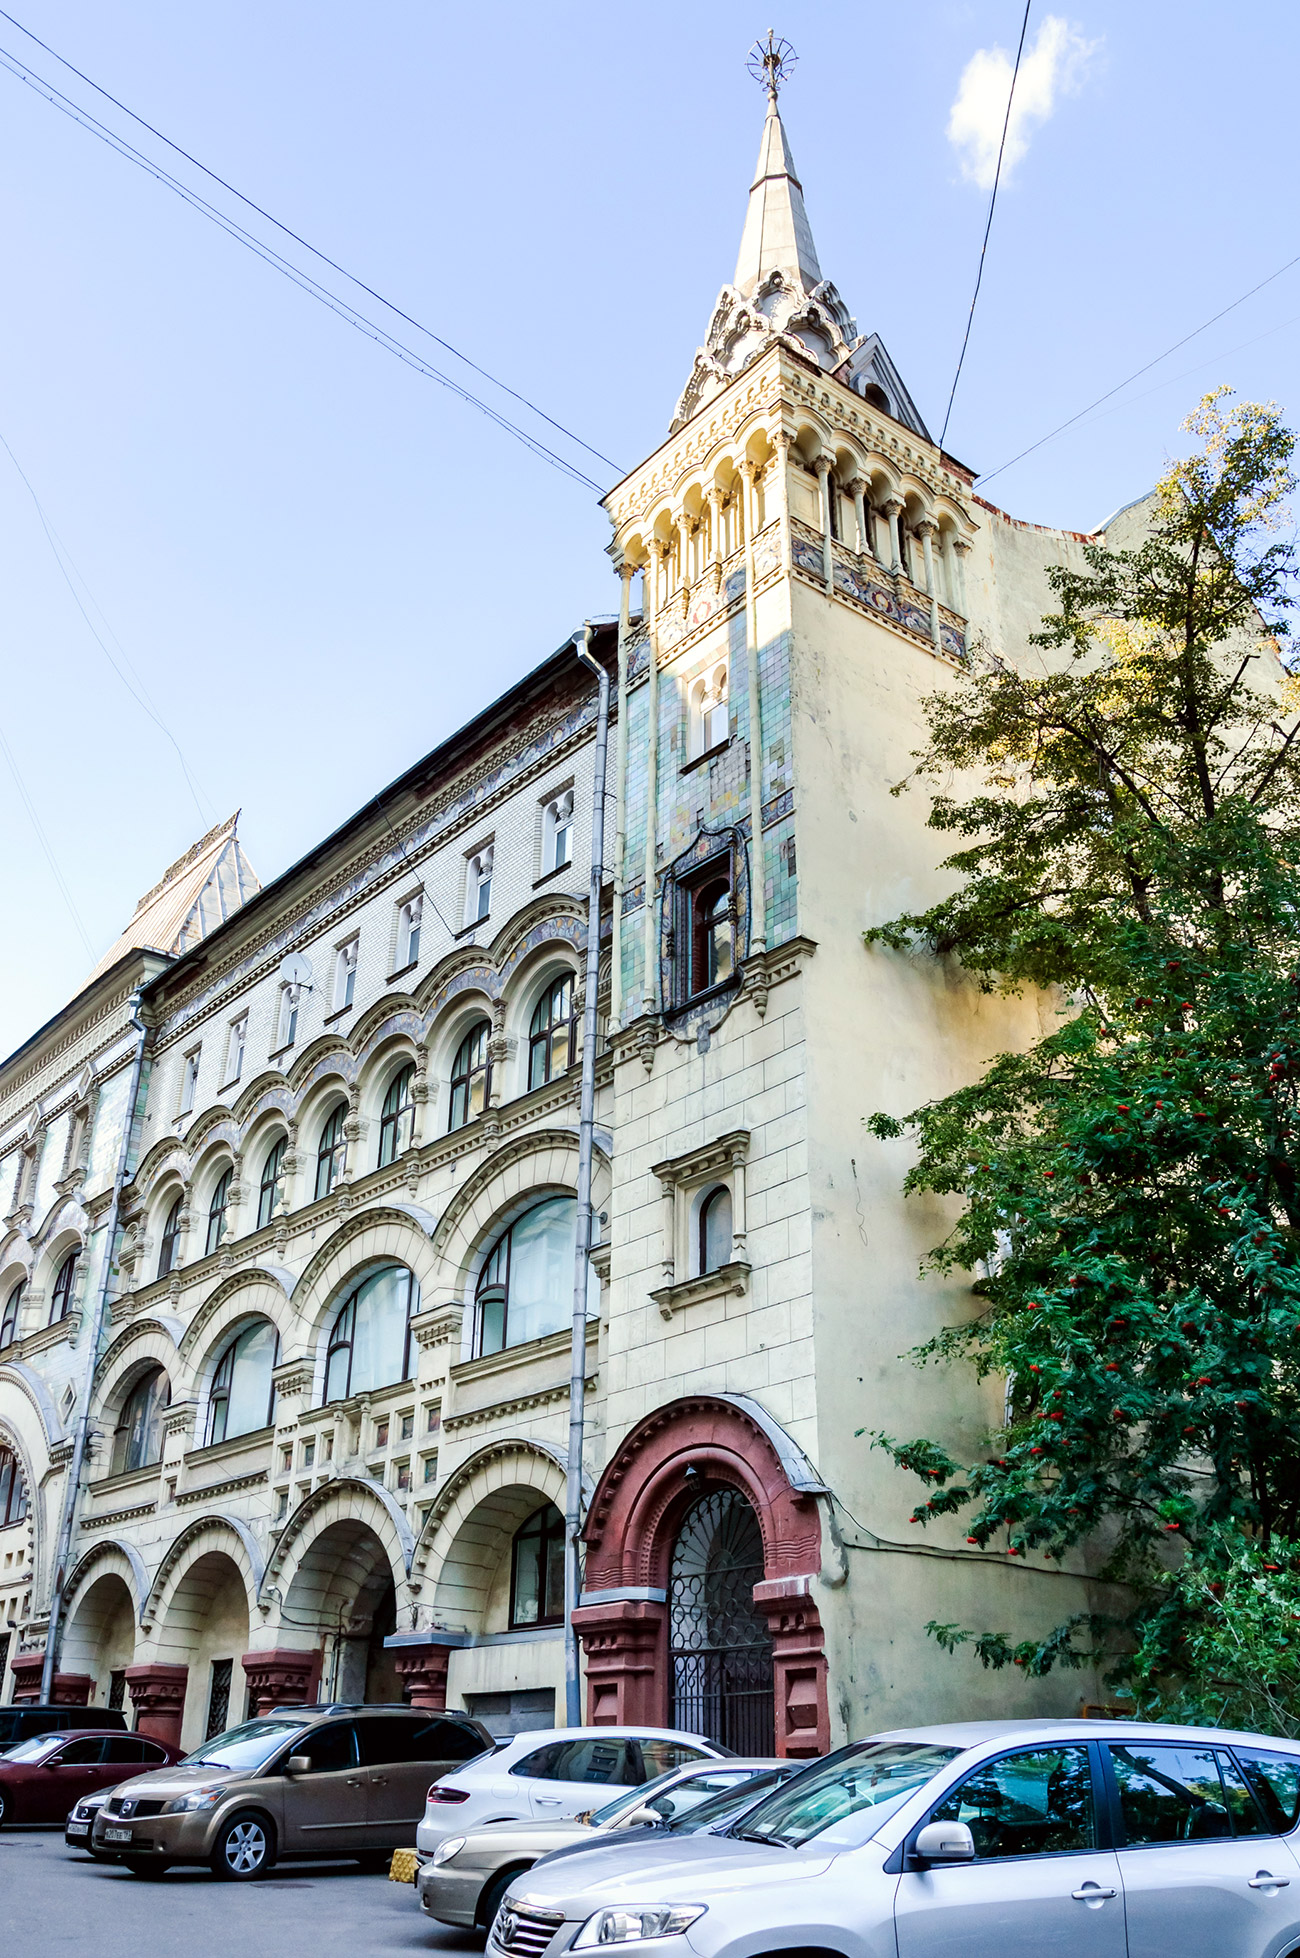 "The gable roof, the towers in the corners, the multi-chromatic tiles on the façade  - this apartment block, which belonged to the Savvino-Storozhevsky Monastery, was built at the beginning of the 20th century in the fashionable pseudo-Russian style." Source: Legion Media